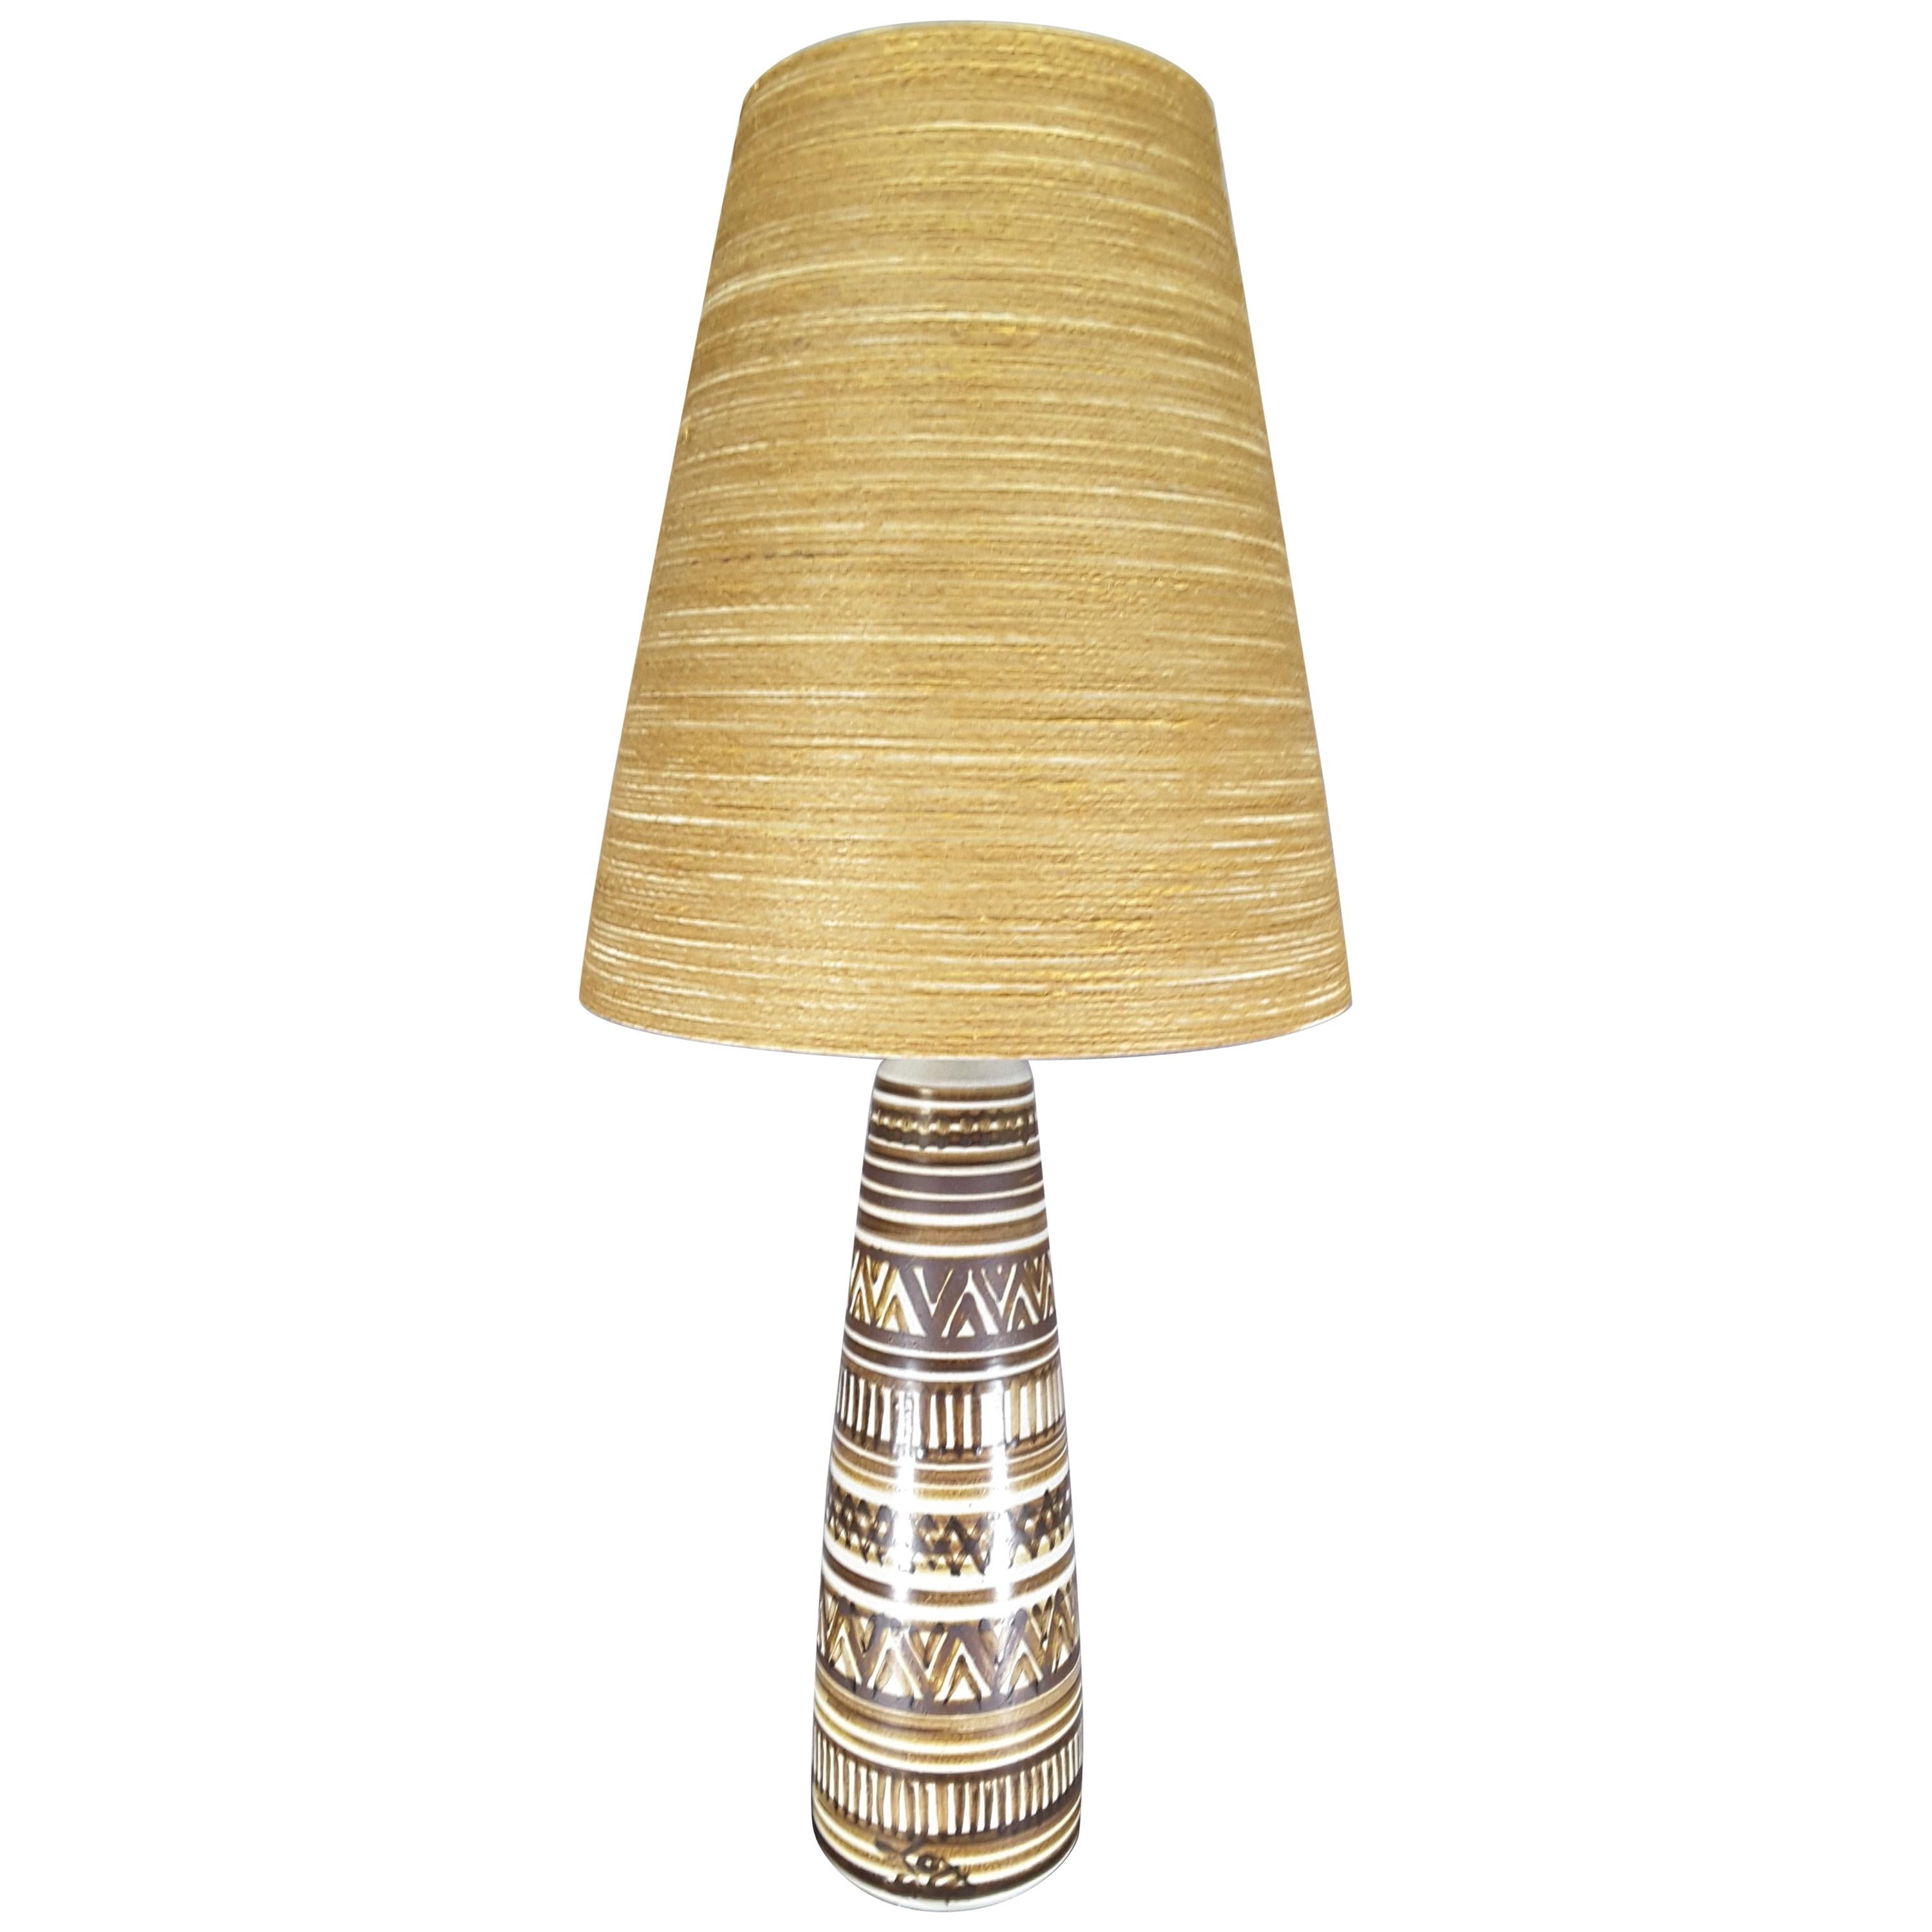 Large Signed Lotte & Gunnar Bostlund Table Lamp, Tribal Pattern, 1960s